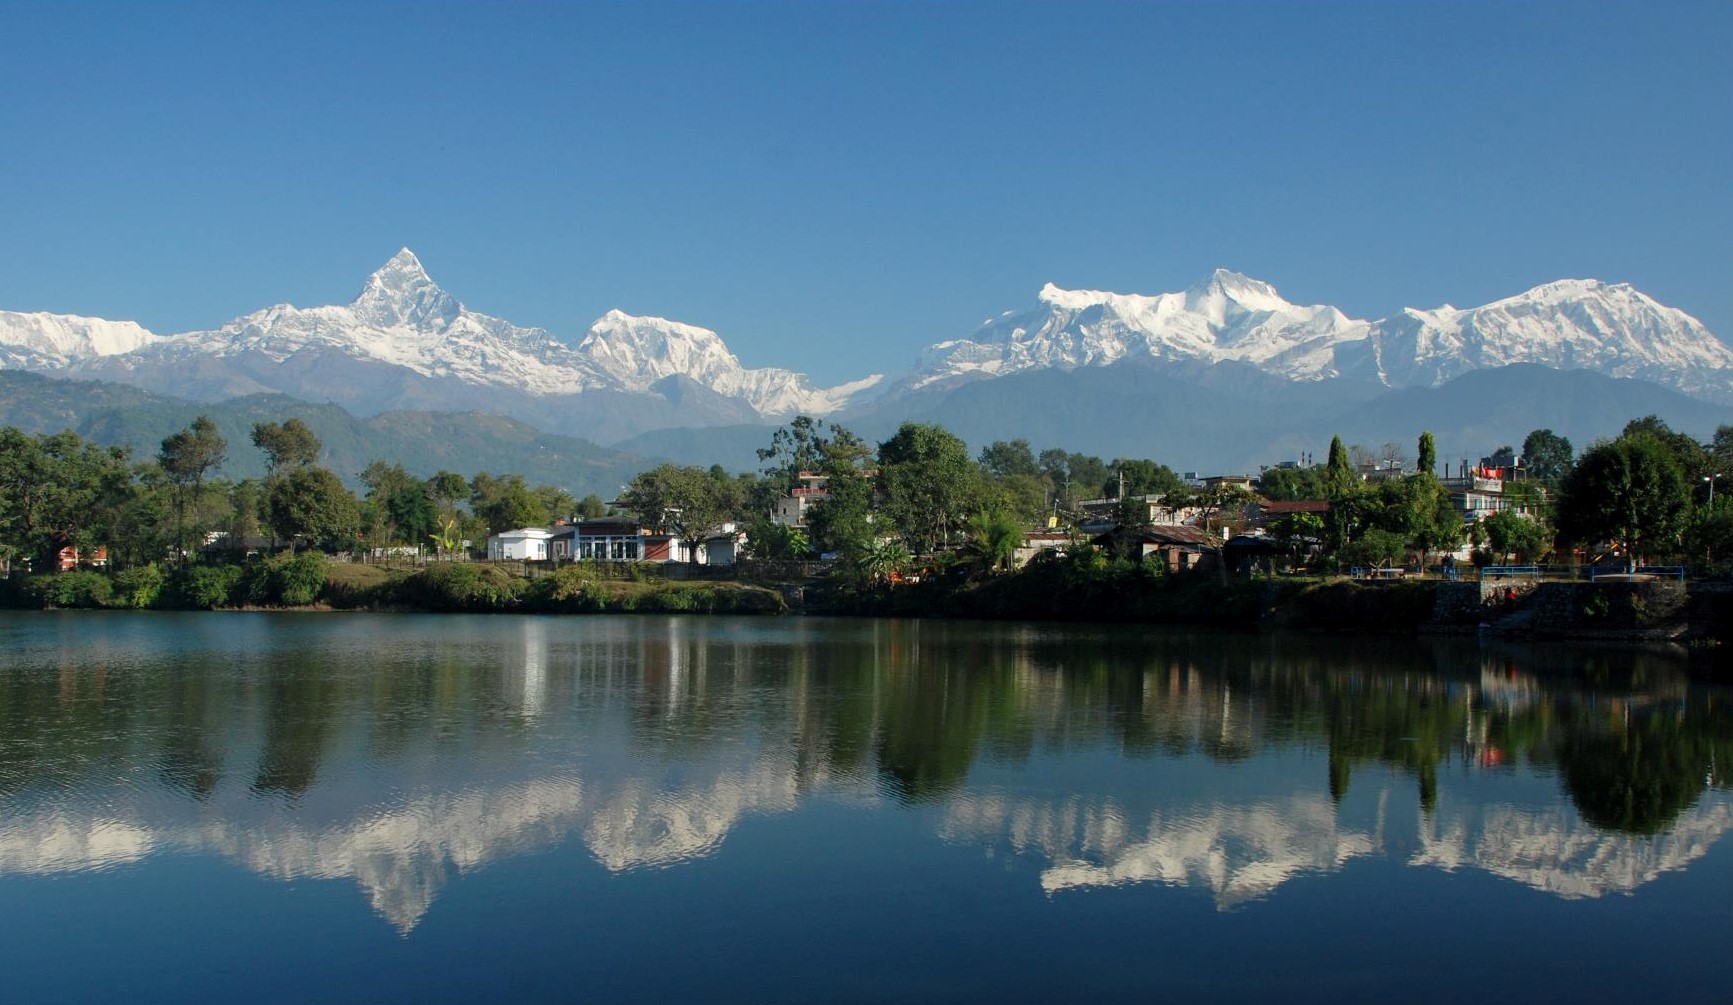 What Himalaya can be seen from Pokhara?